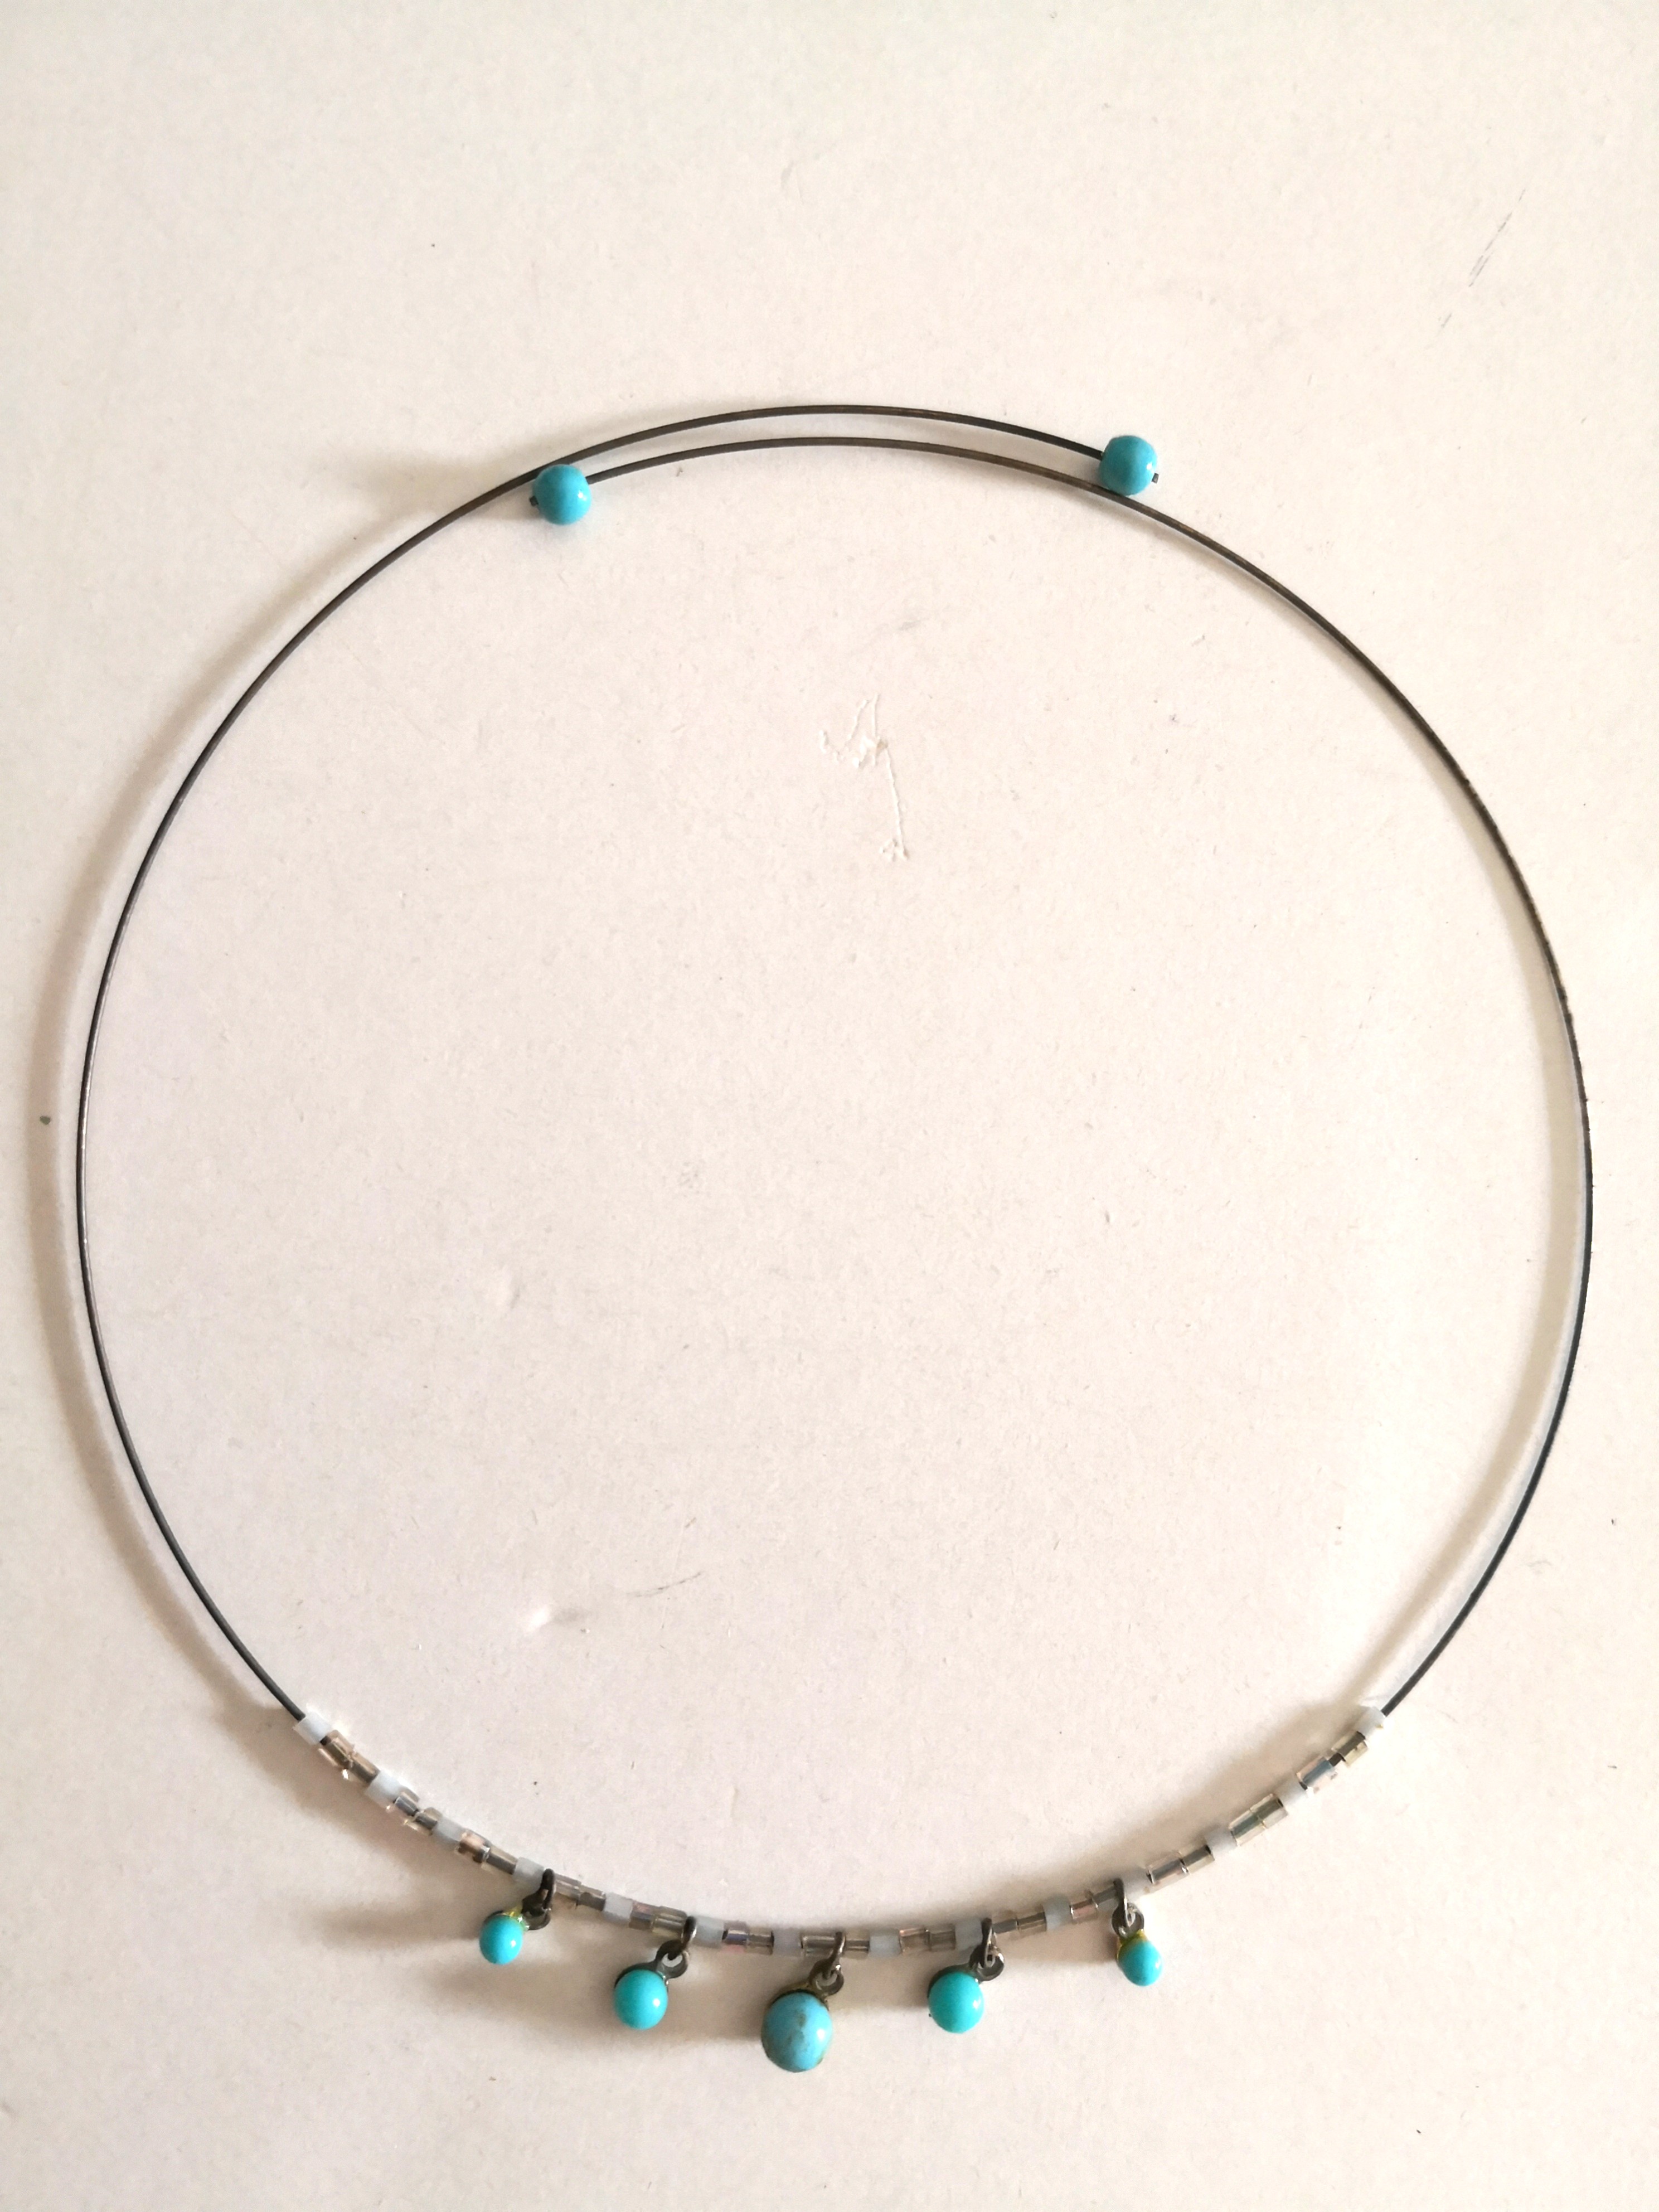 PRELOVED Women's Stiff Choker Collar Ring With Tiny Turquoise Blue Beads Fashion Pendant / Necklace - just like new condition